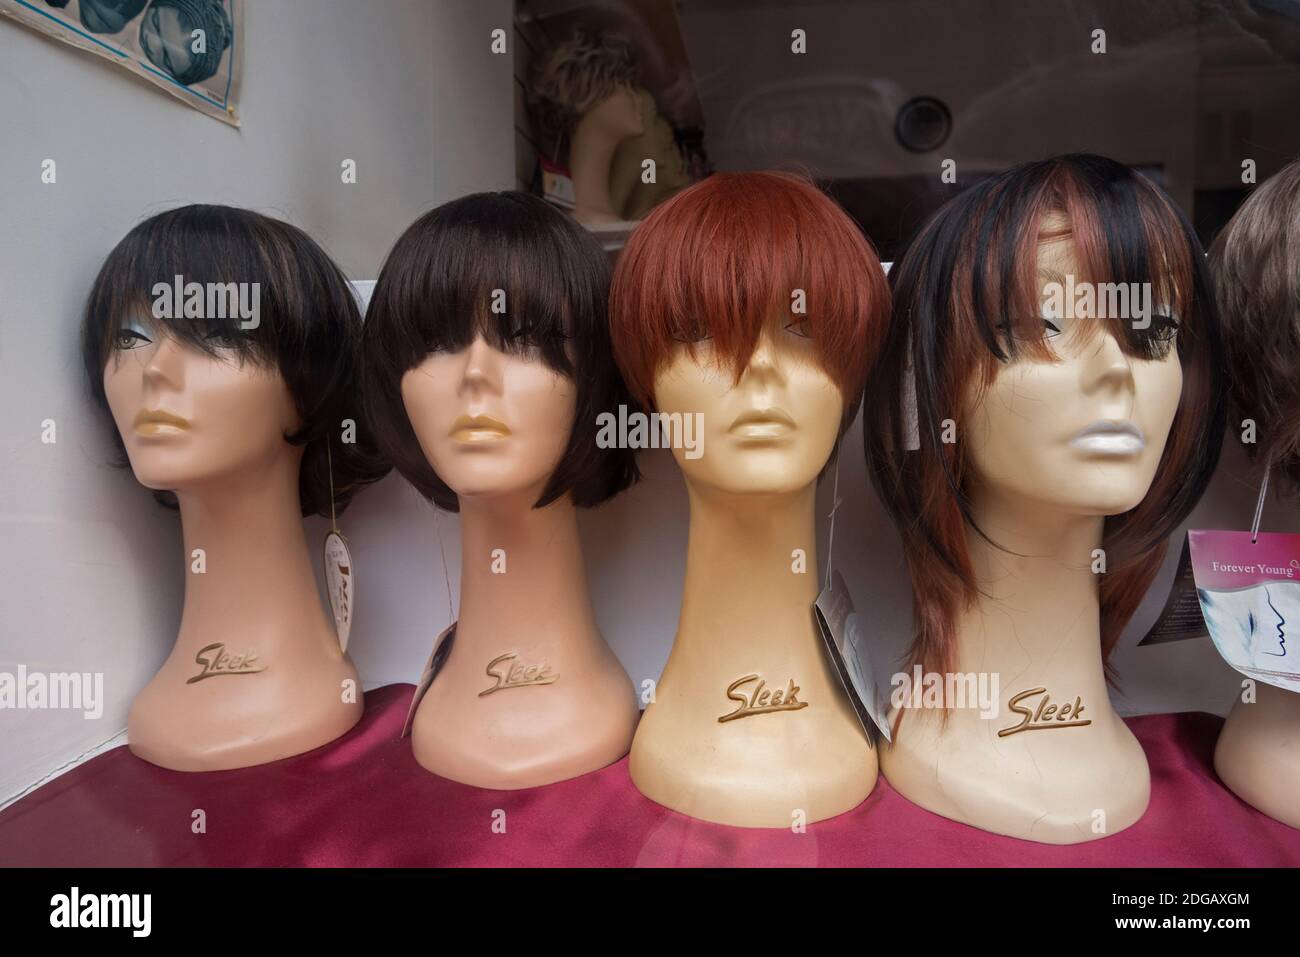 Female mannequin heads with wigs on display in a shop window in Edinburgh, Scotland, UK. Stock Photo